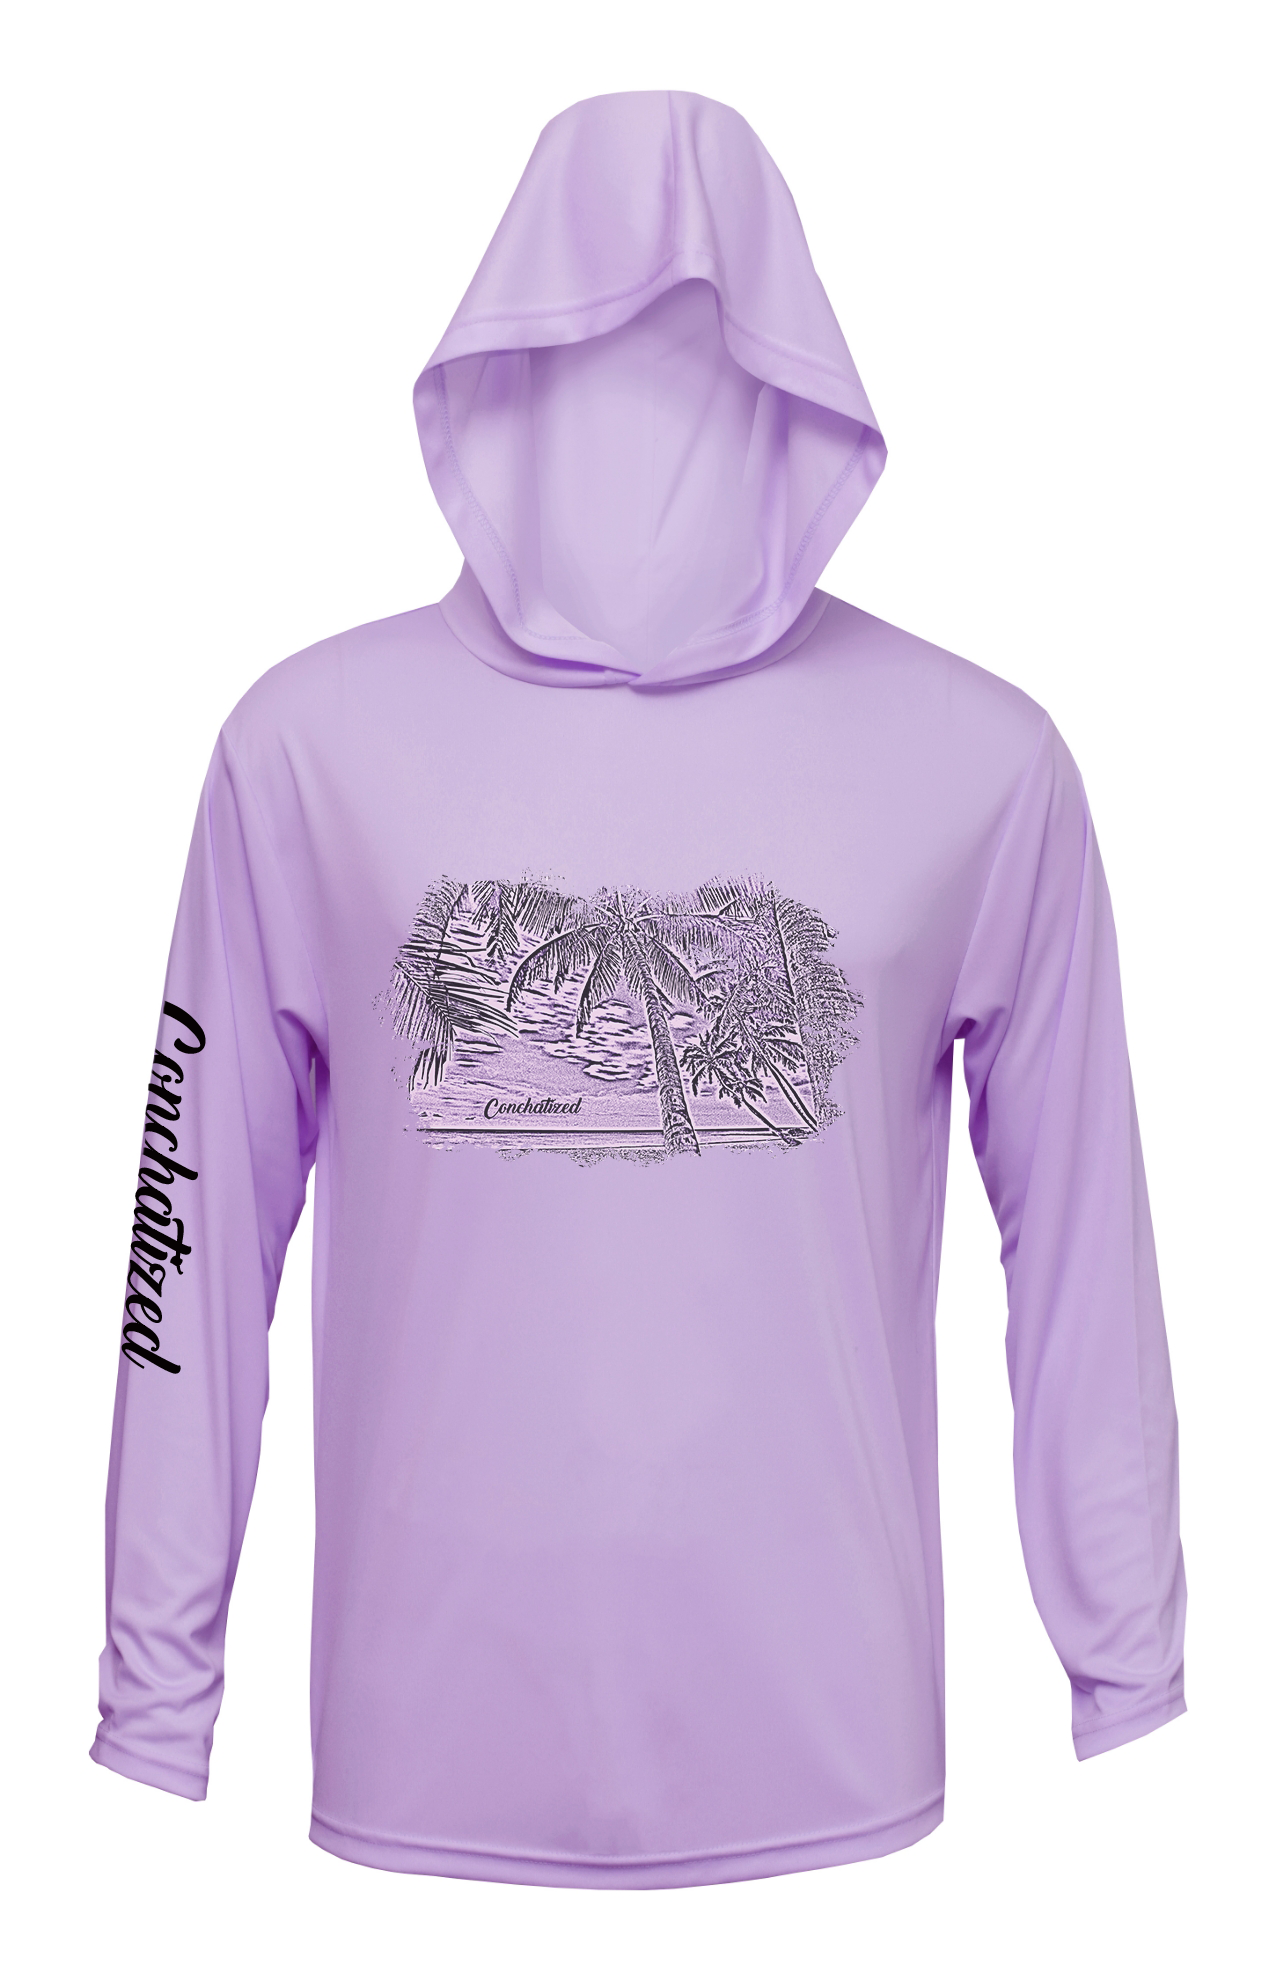 YOUTH Performance Long Sleeve with Hood, Palm Trees in Paradise